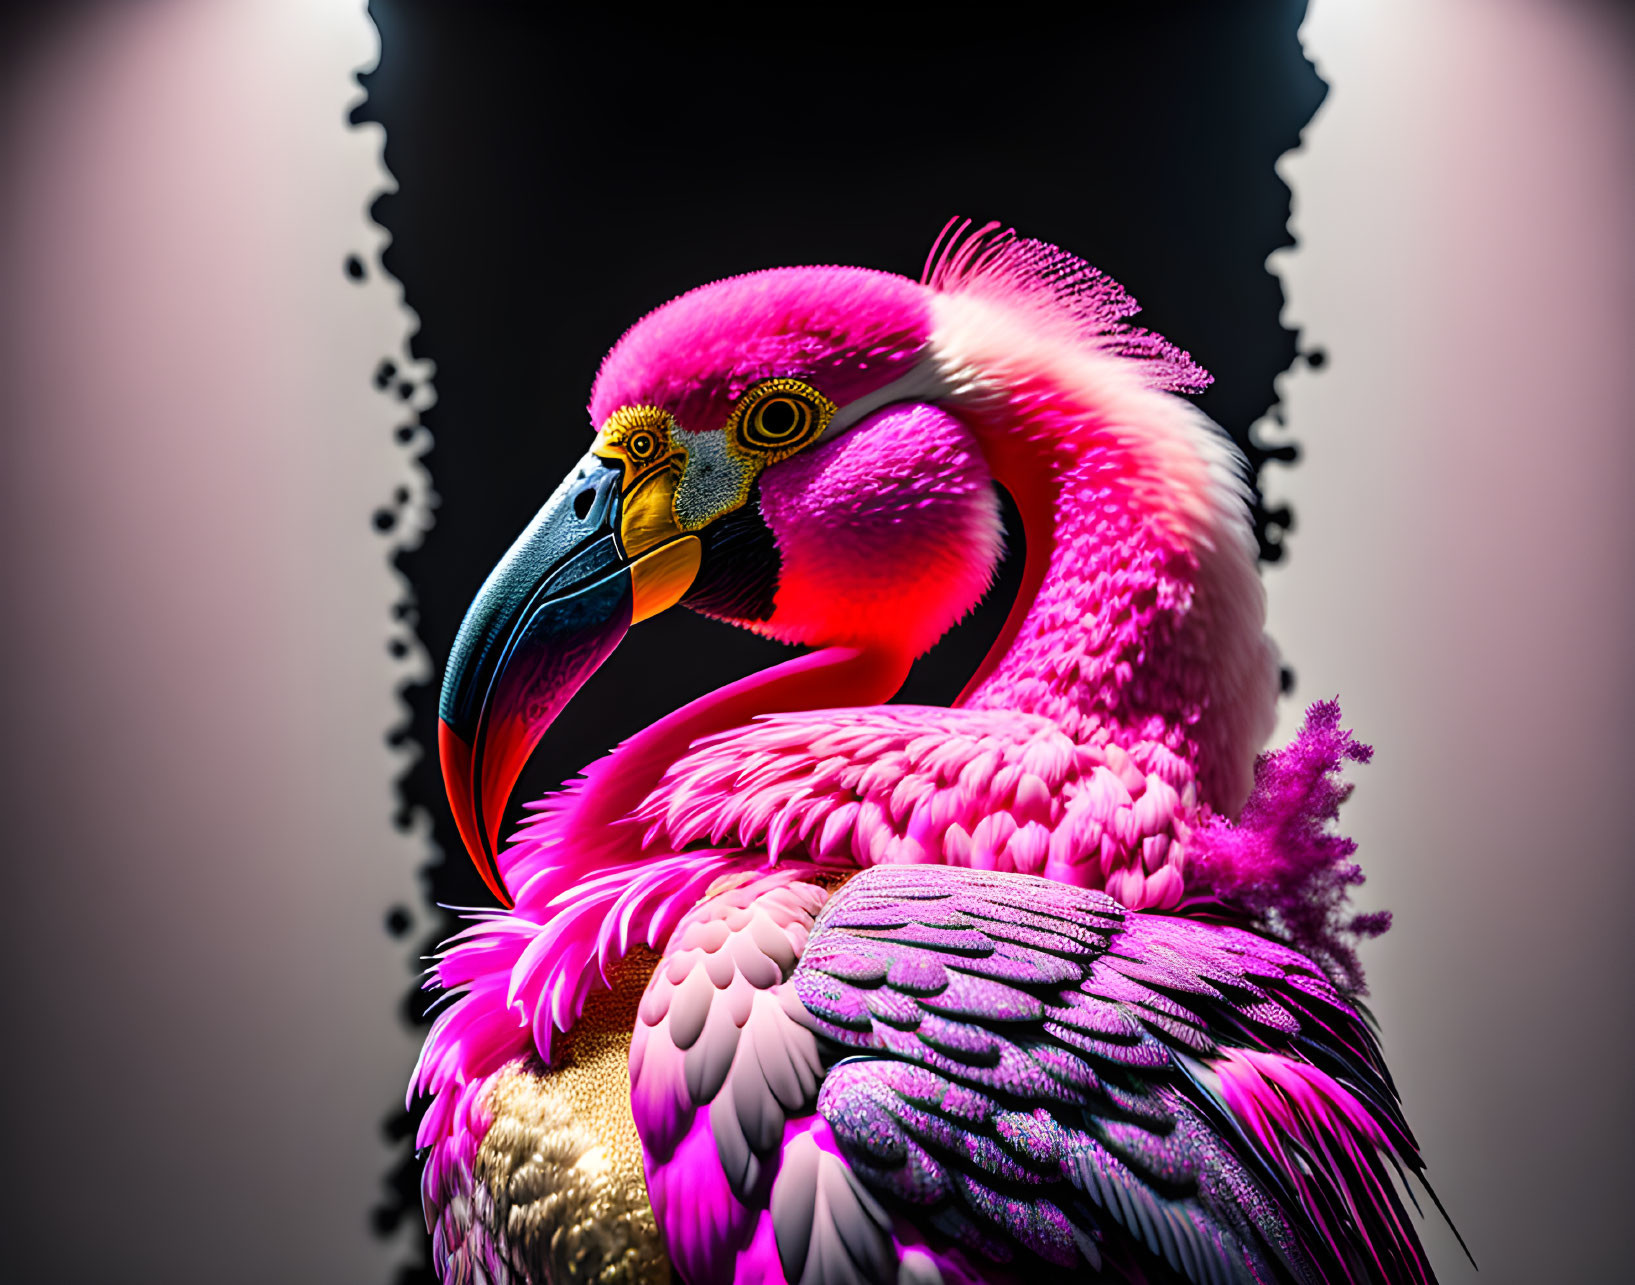 Colorful Stylized Flamingo Artwork with Pink Feathers